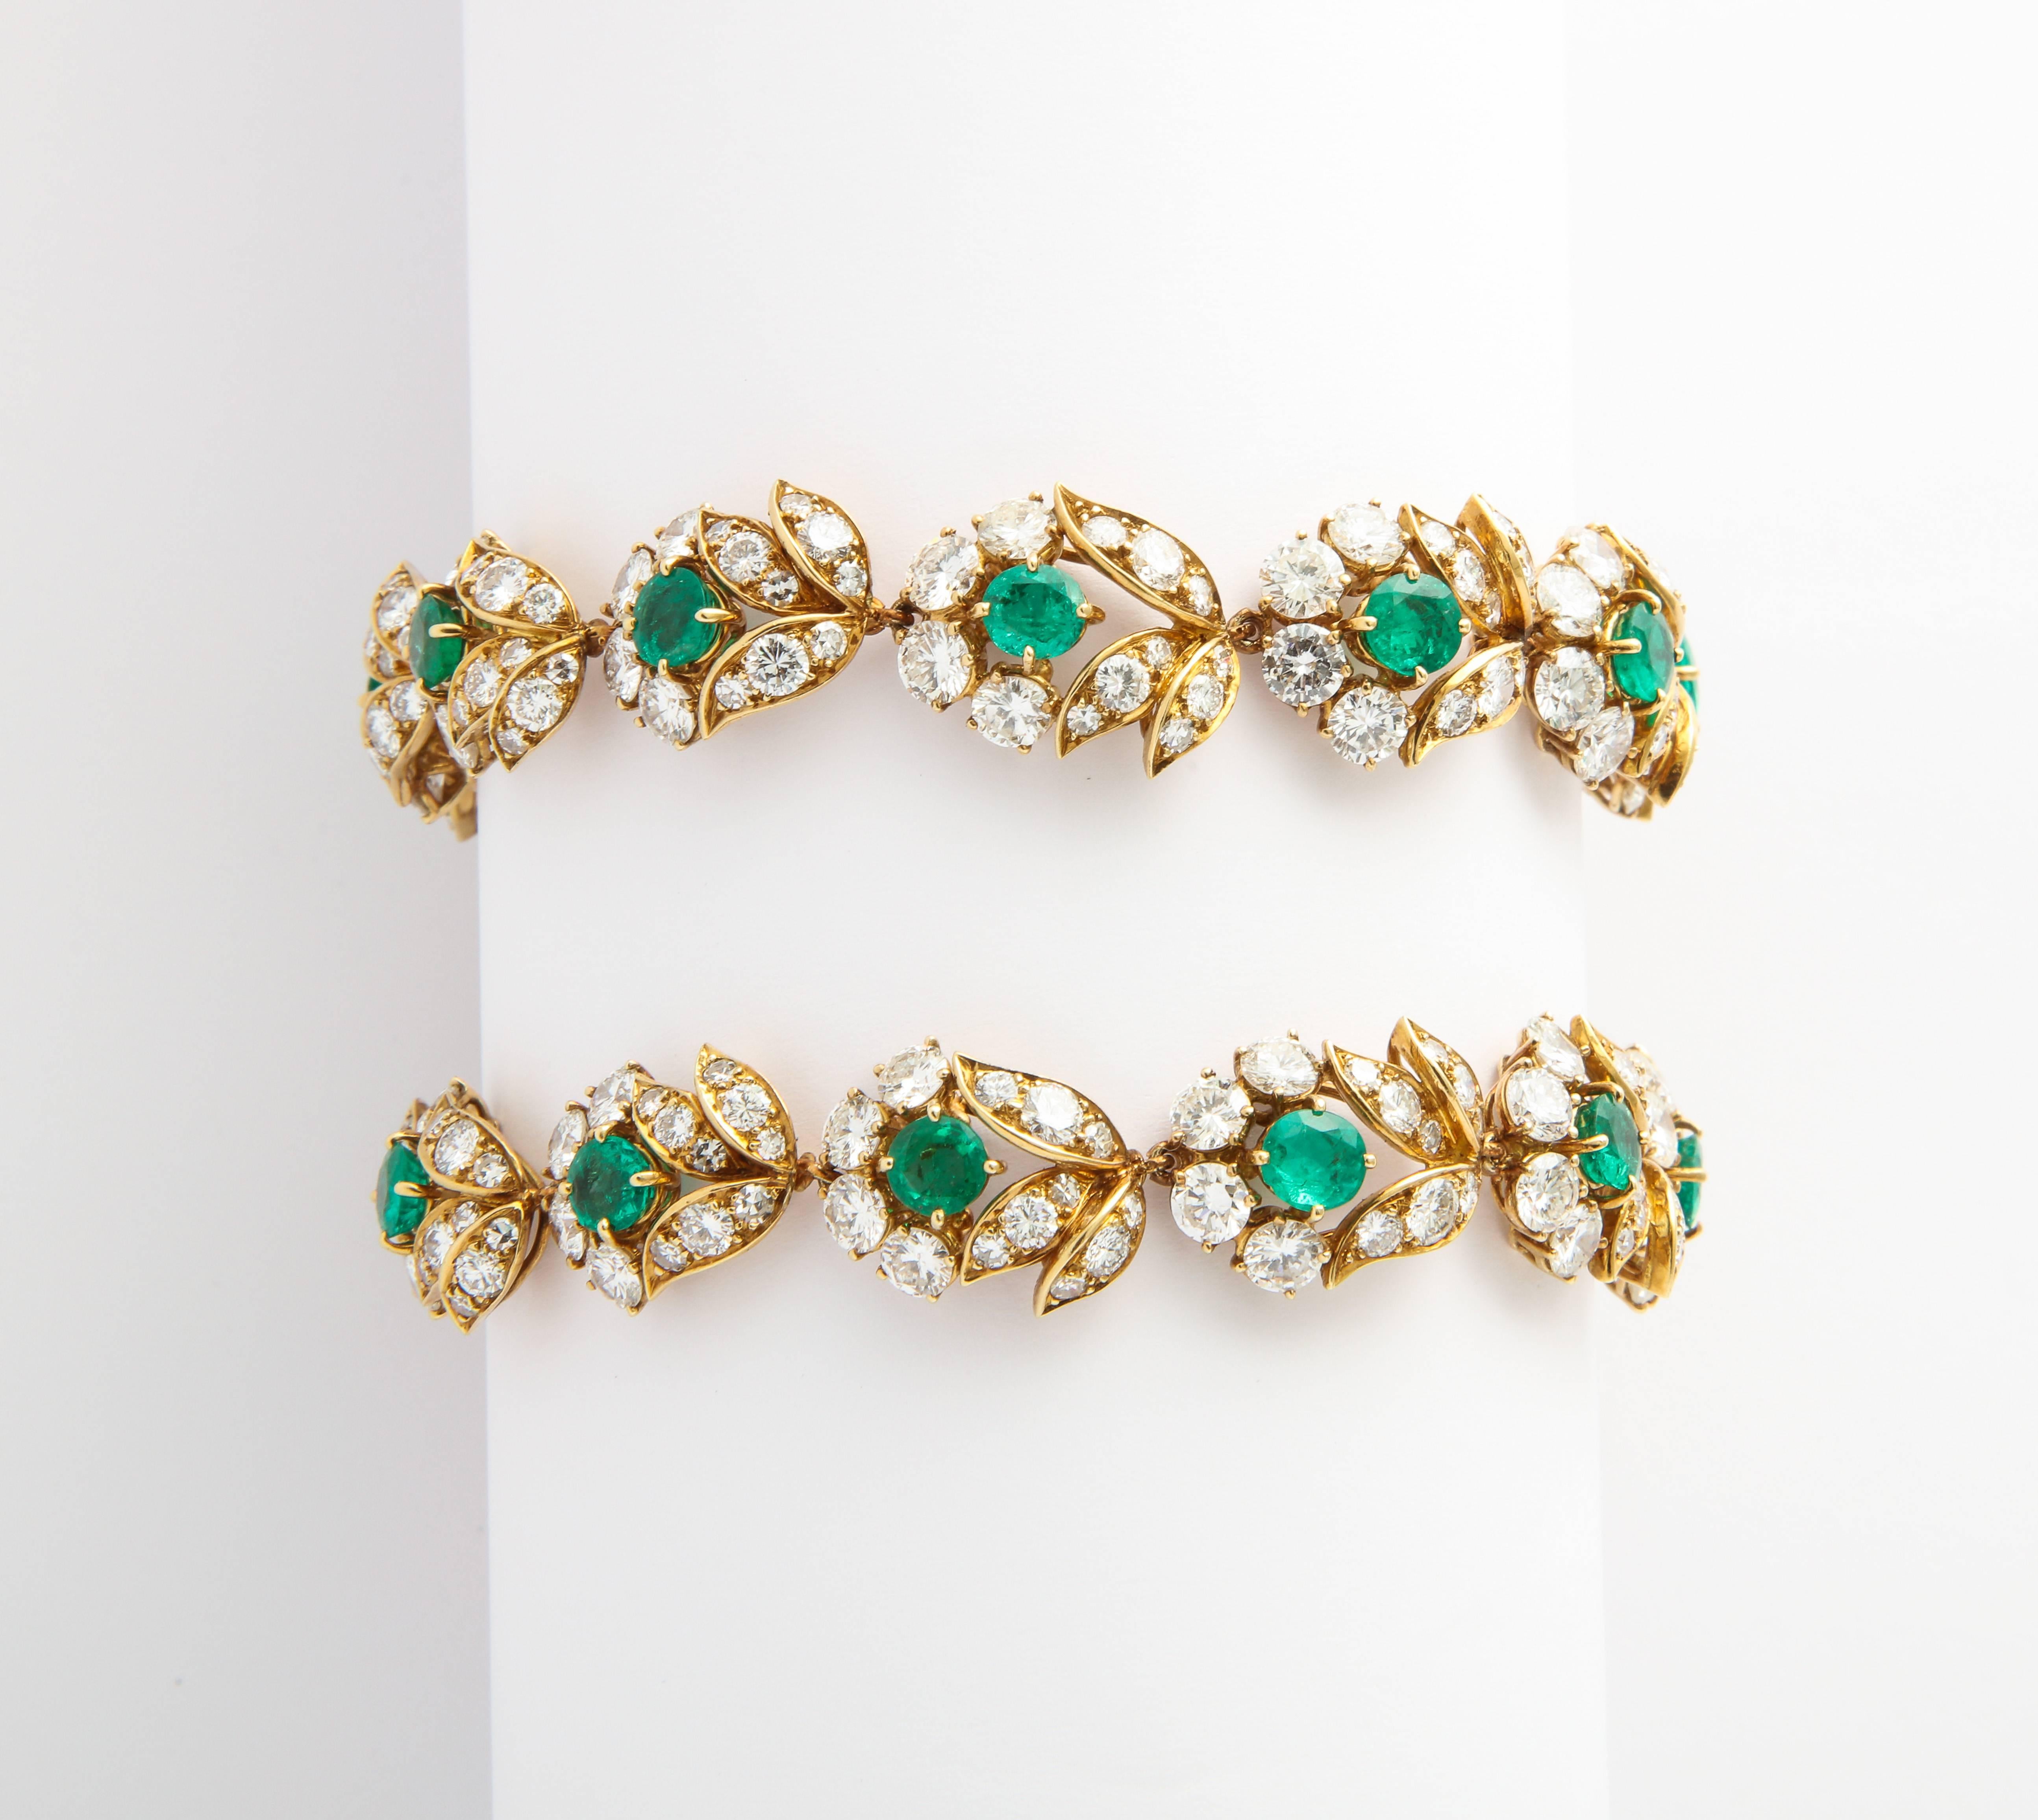 A Van Cleef and Arpels Diamond and Emerald Necklace convertible to two Bracelets

A superb floral motif necklace made by VCA, that converts into two bracelets.

Approx 35 ct diamonds. Approx 10-15 ct emeralds.

Made in France circa 1960